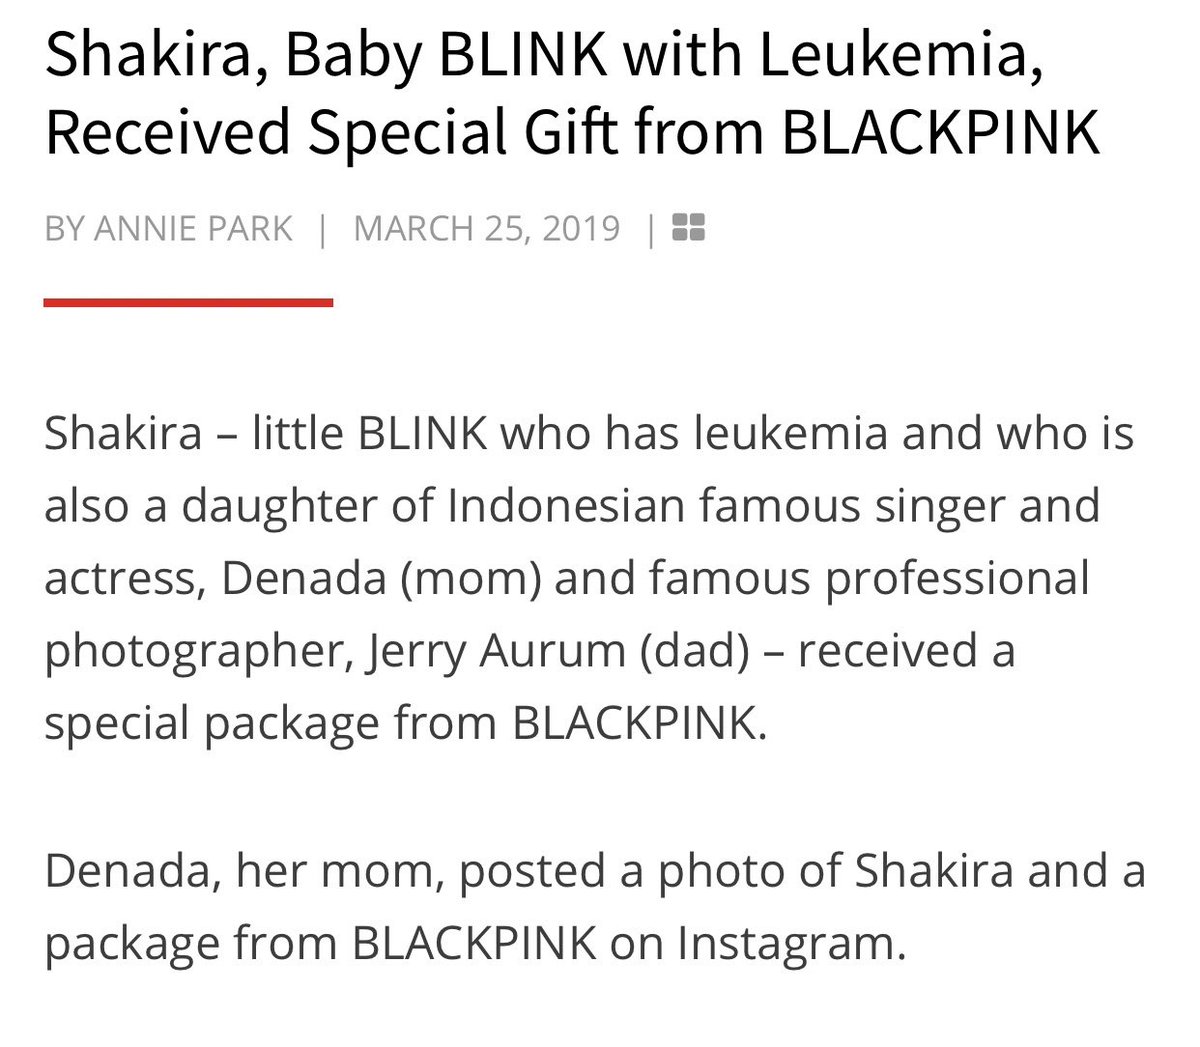  @BLACKPINK personally sent signed albums and merchandise box to a baby blink named Shakira who is suffering from leukemia